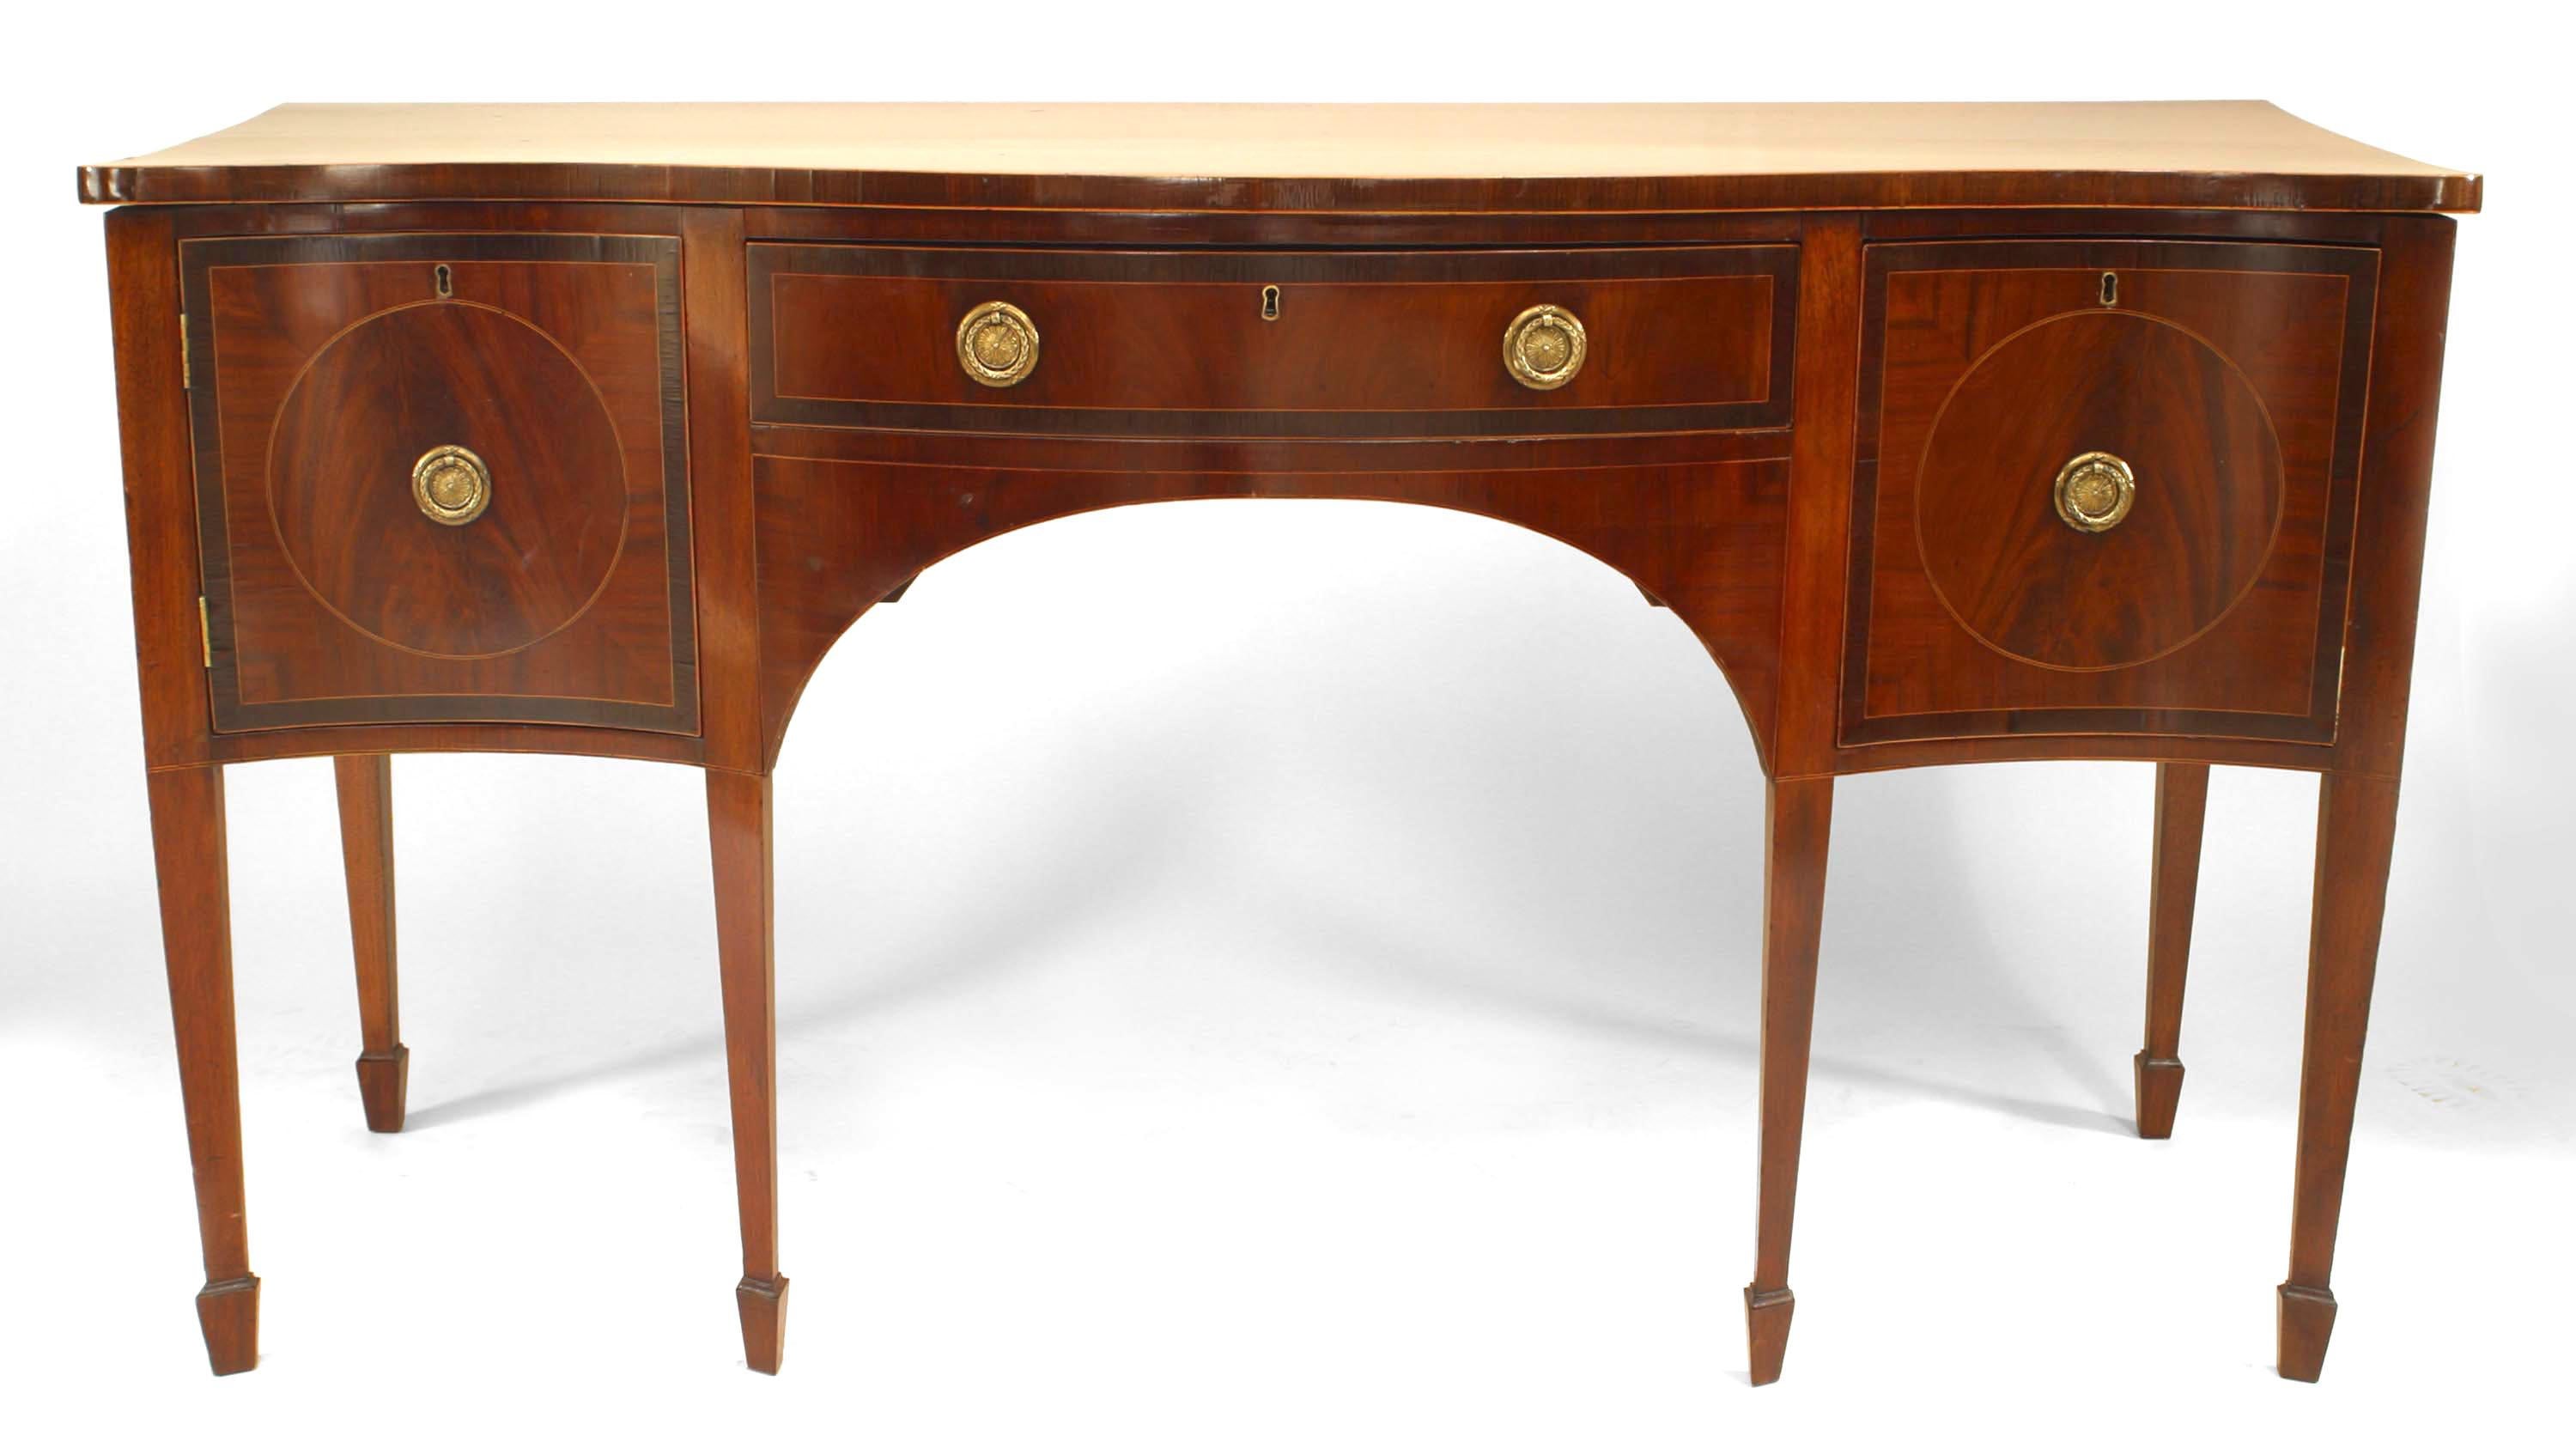 English Georgian mahogany bowfront sideboard with inlaid satinwood banding and brass wreath design drawer handles and supported on shaped spade legs and feet.

 